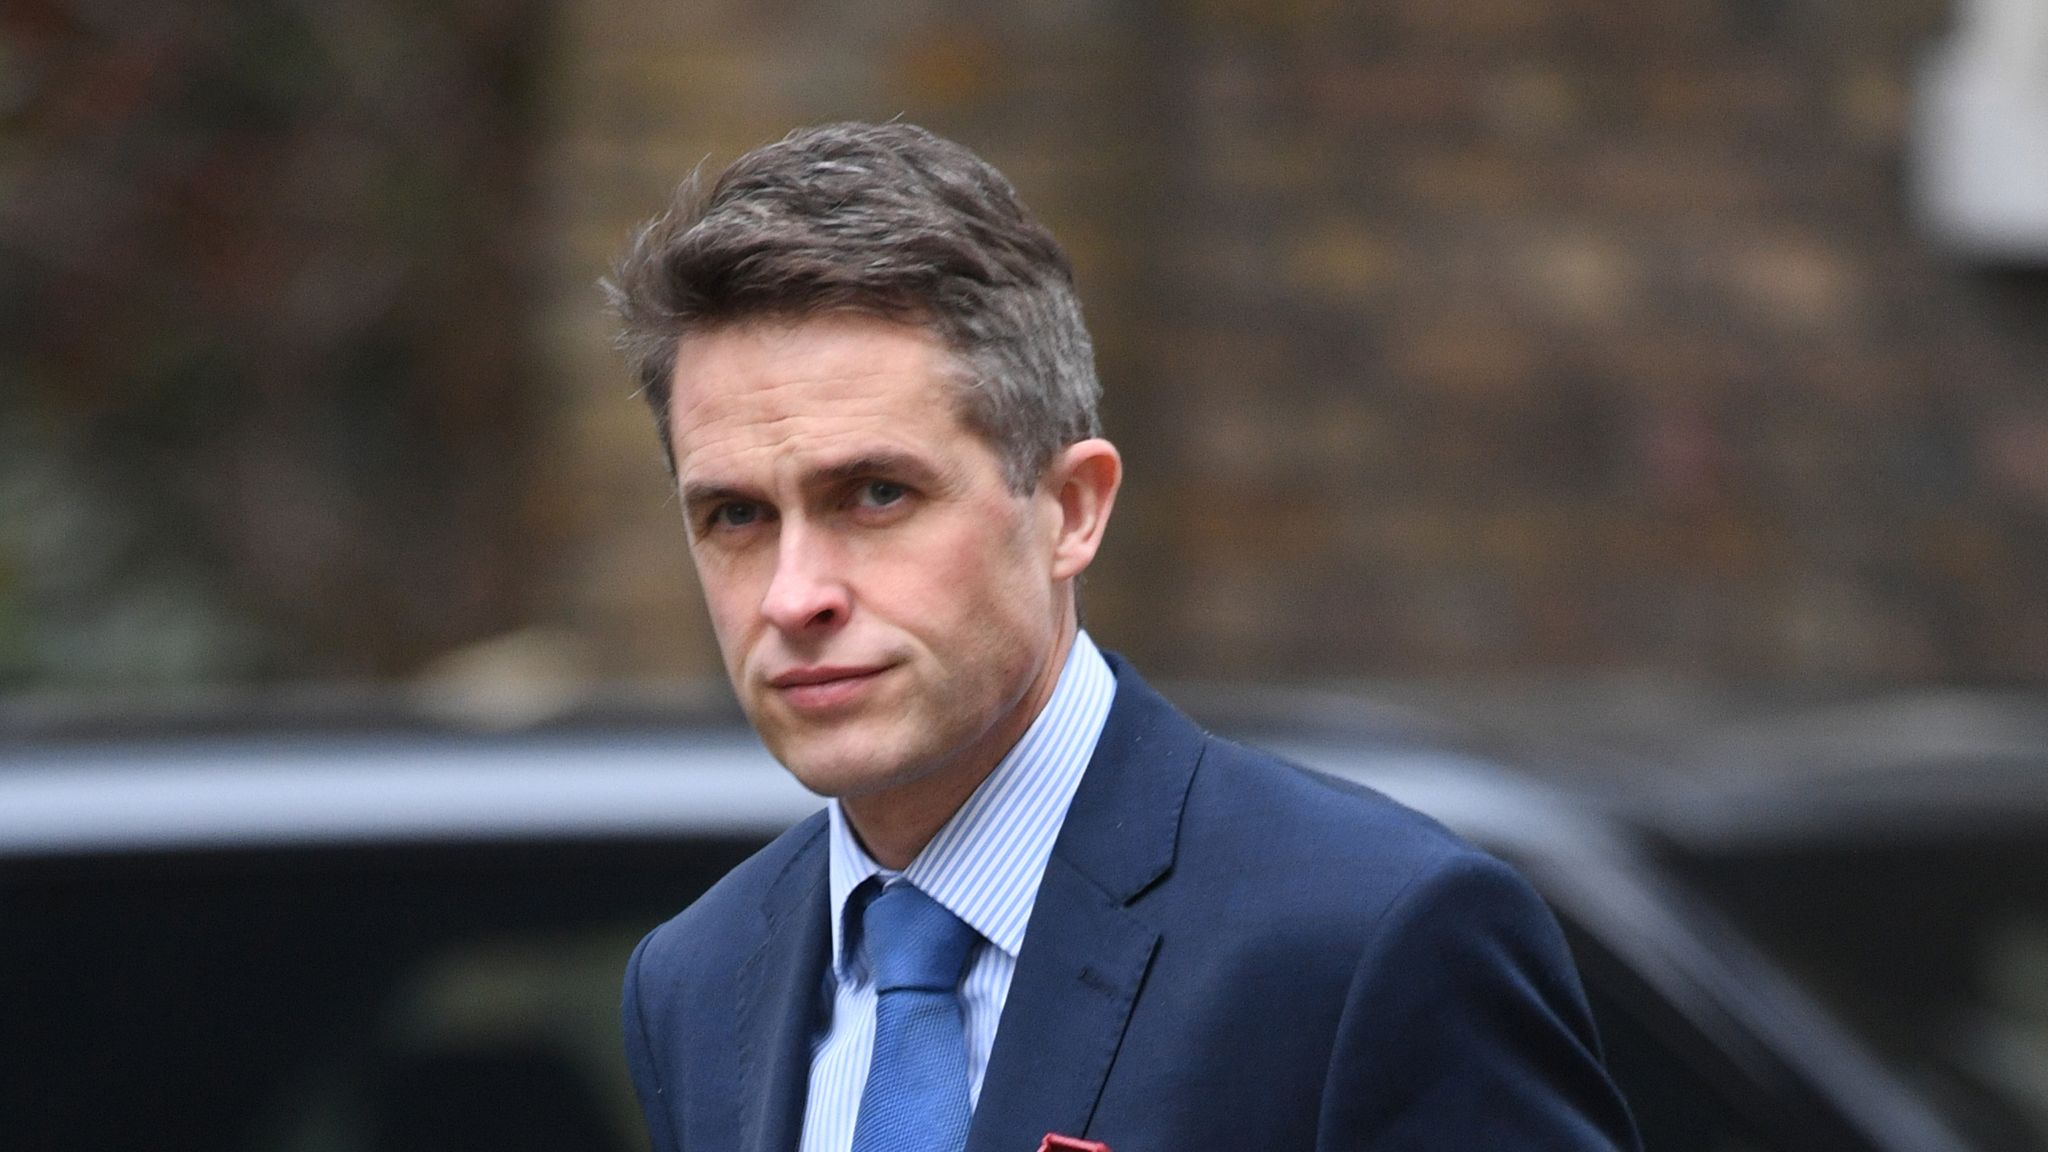 Gavin Williamson outdoes the lot of them In Cabinet full of idiots Says Mark Steel!